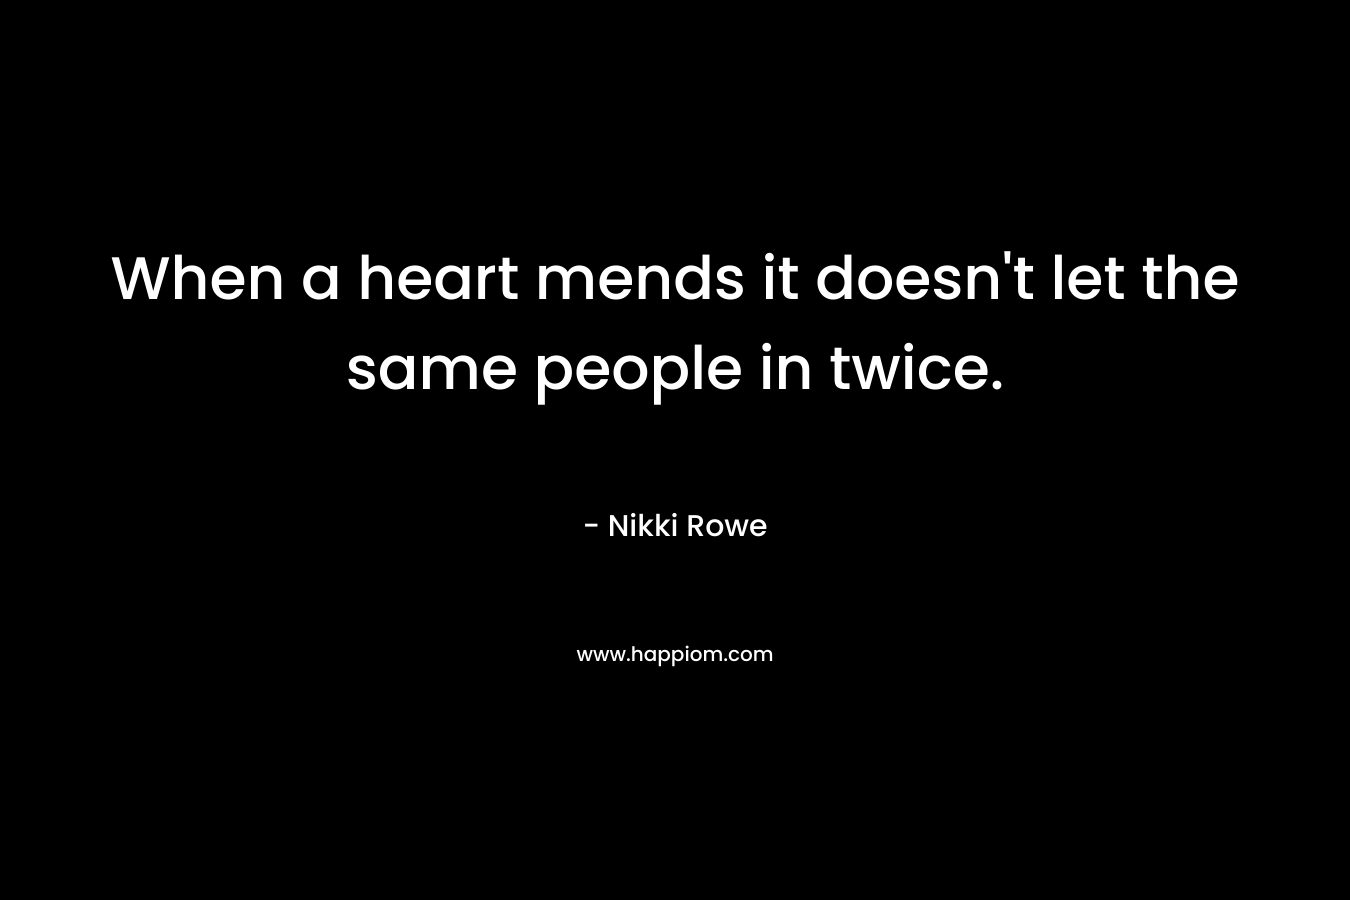 When a heart mends it doesn’t let the same people in twice. – Nikki Rowe